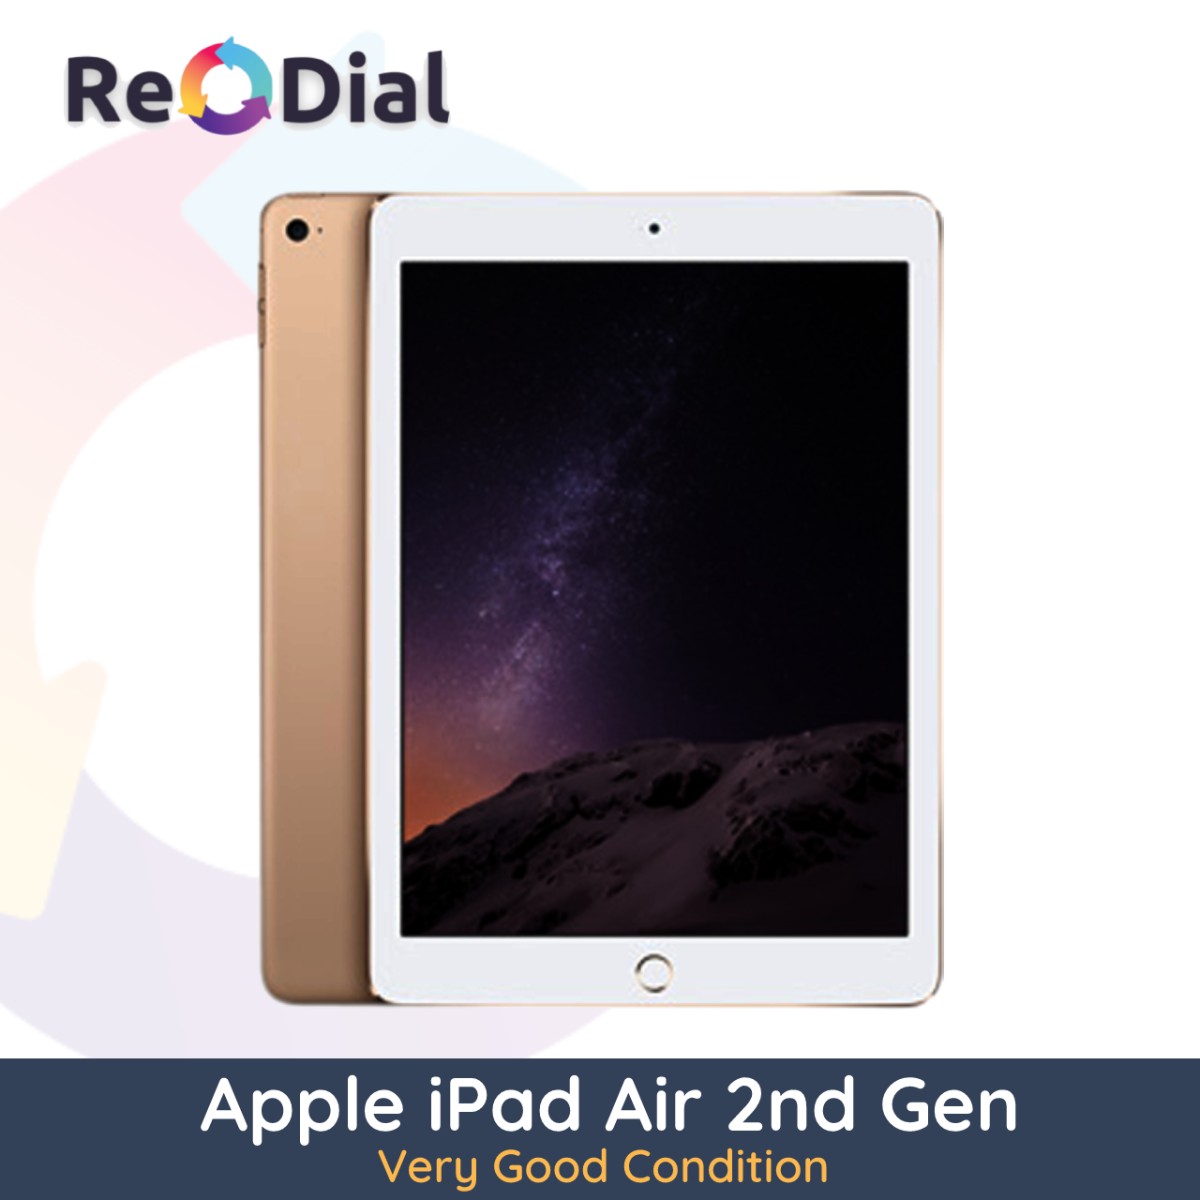 Apple iPad Air 2nd Gen (2014) Wi-Fi - Very Good Condition